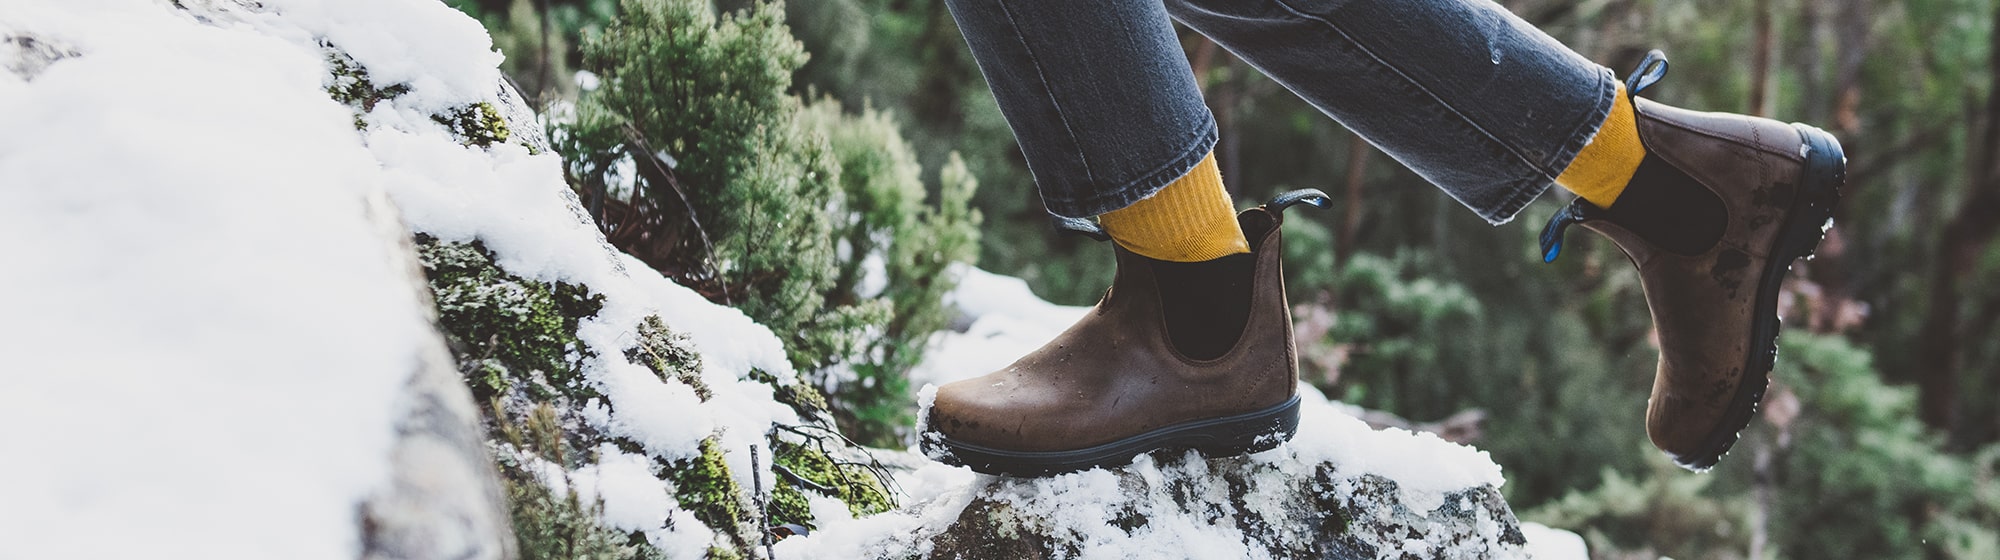 Women's Winter Thermal - Blundstone Canada - Chelsea boots